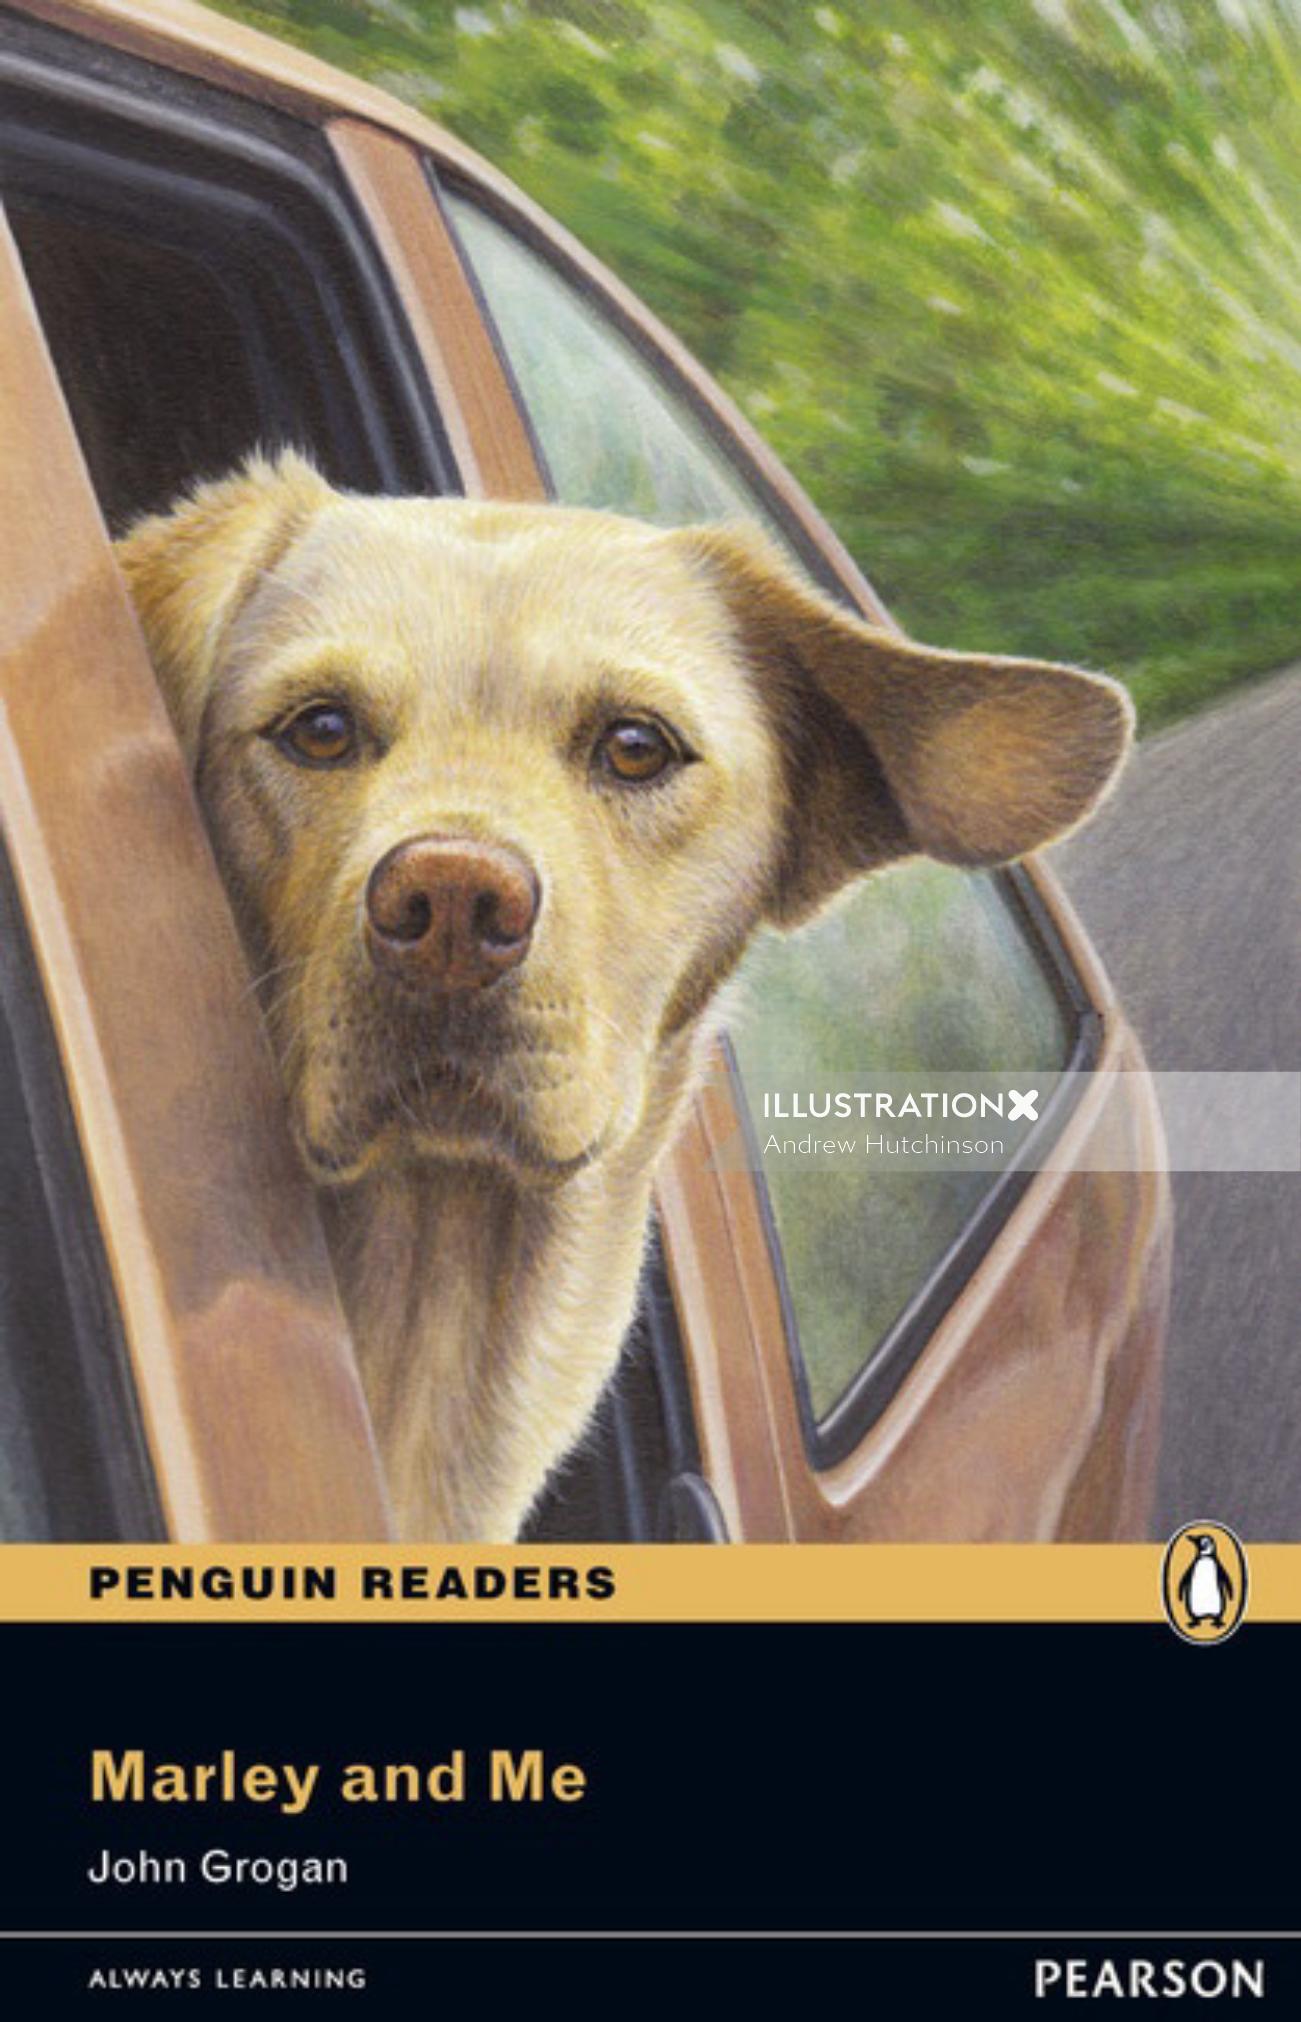 Illustration of dog from car window © Andrew Hutchinson